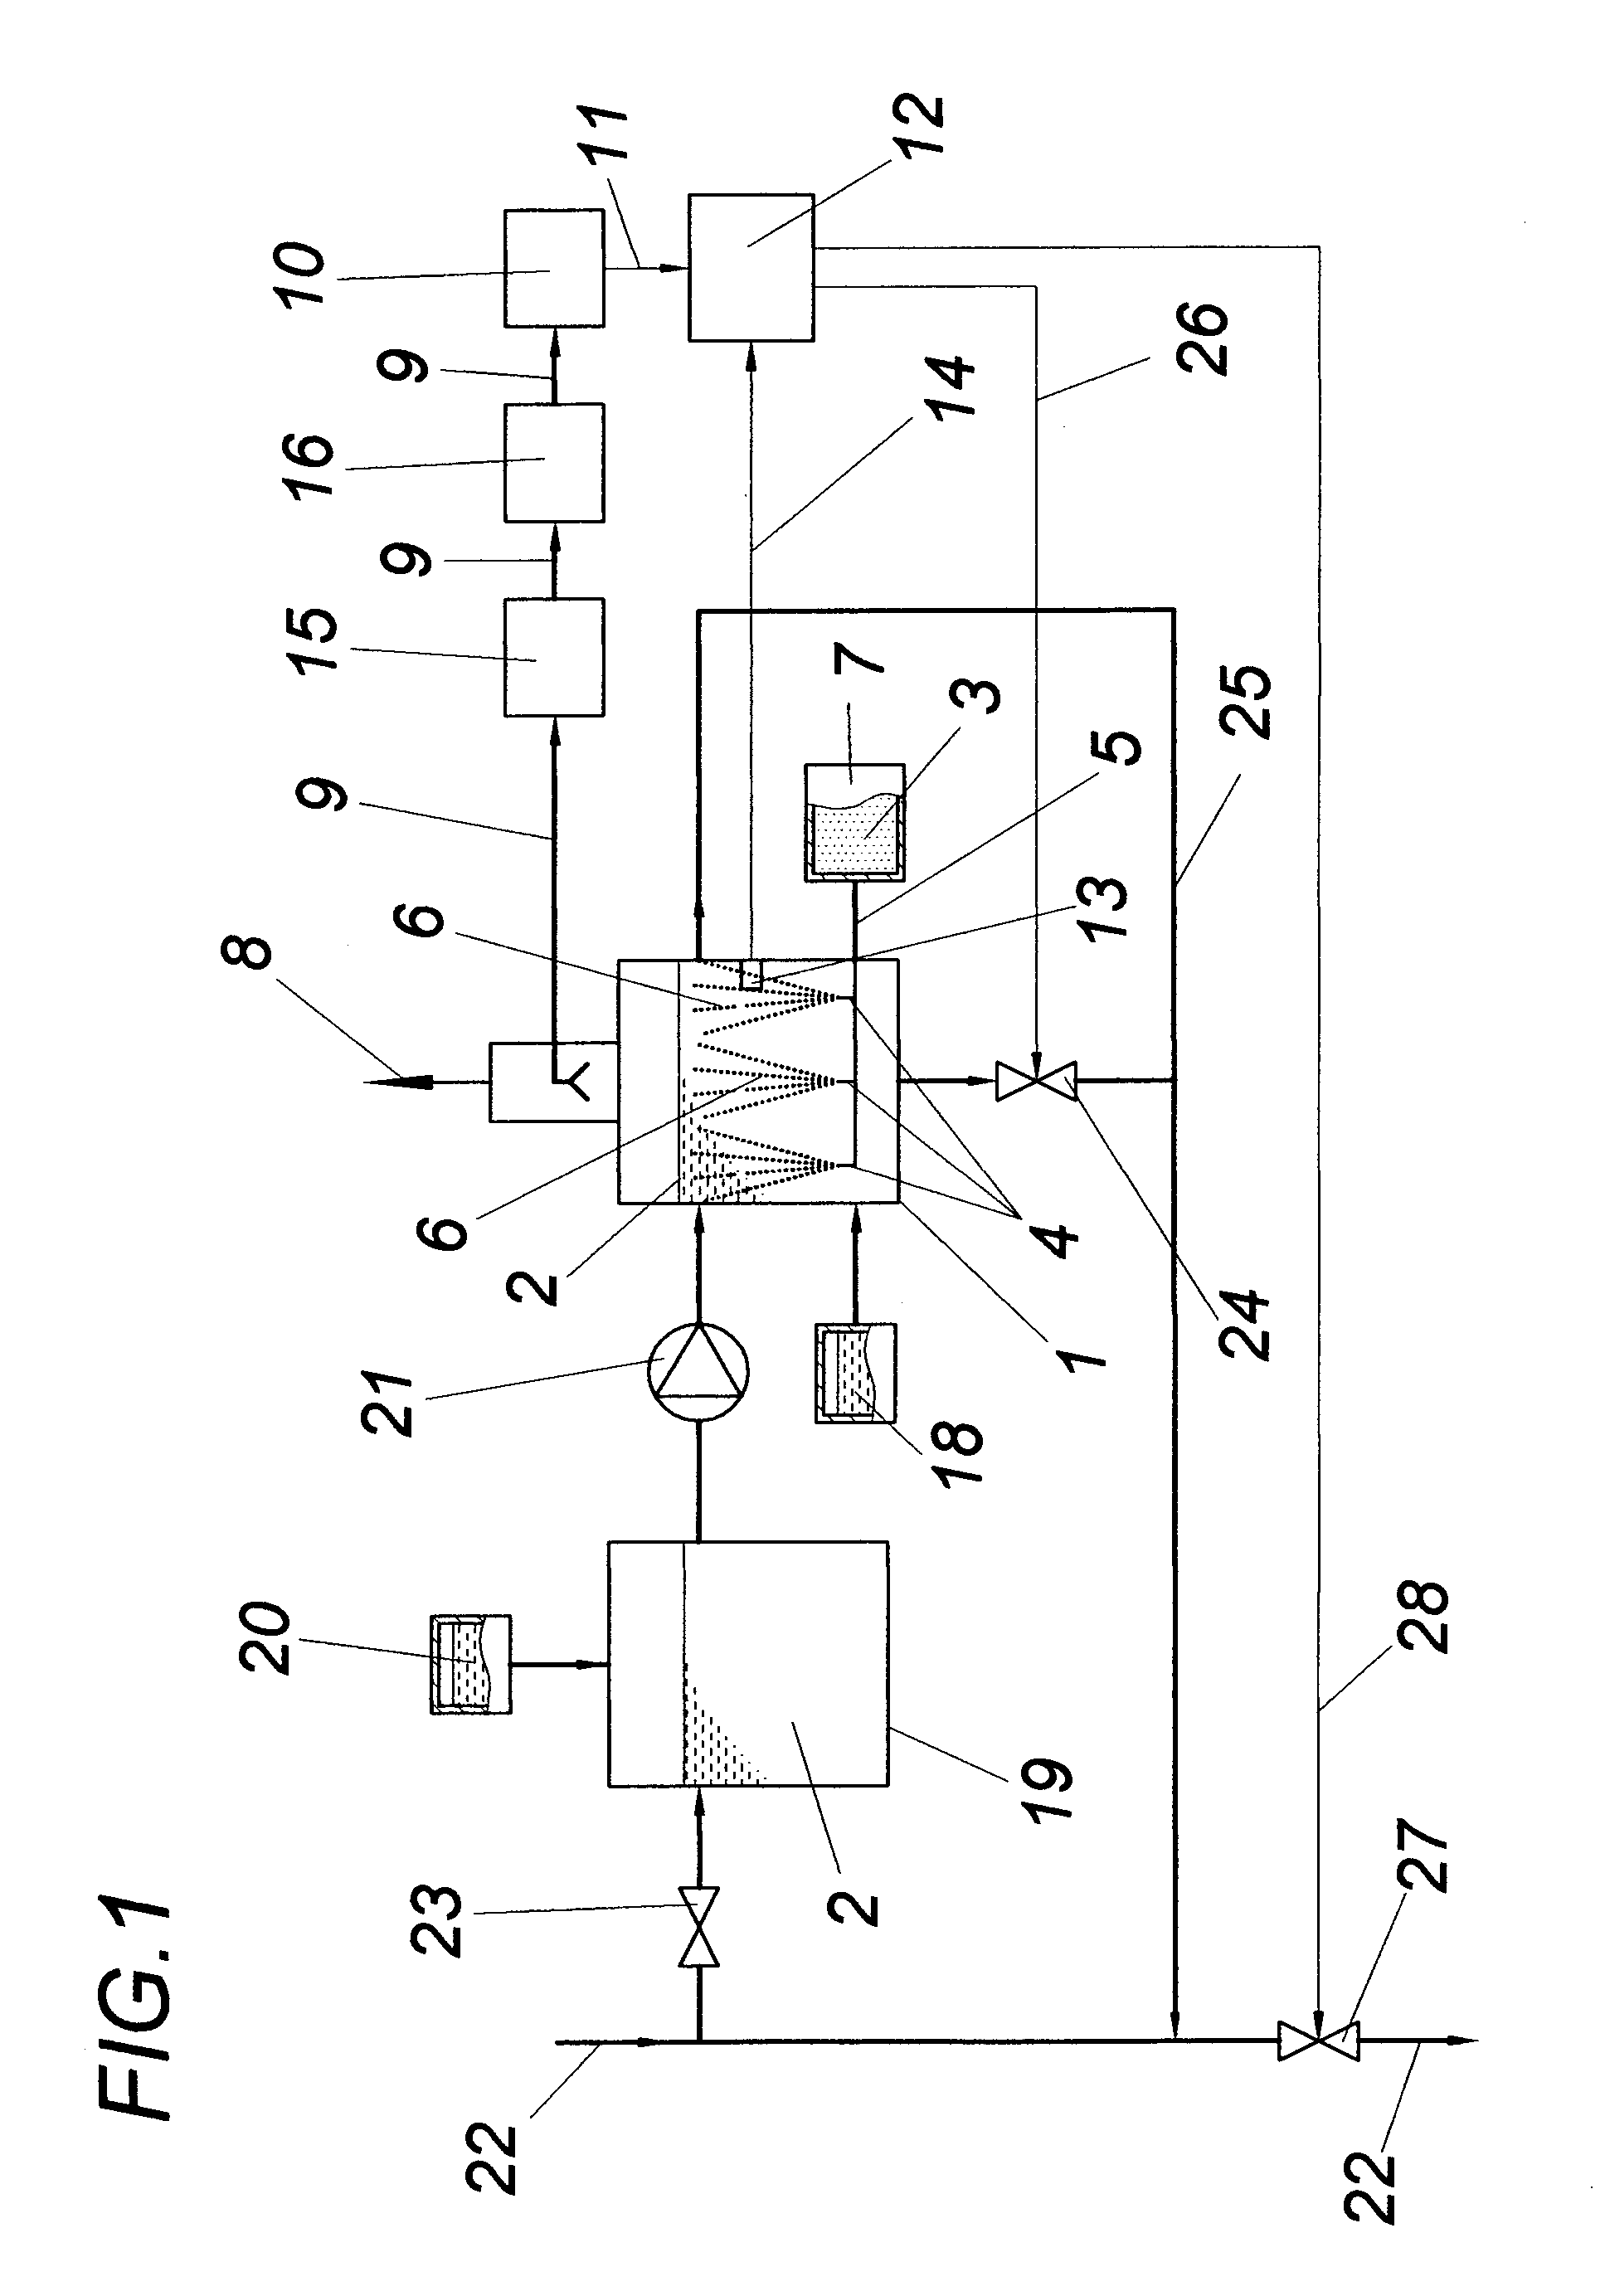 Method for continuously determining the concentration of at least one cn compound in an aqueous solution